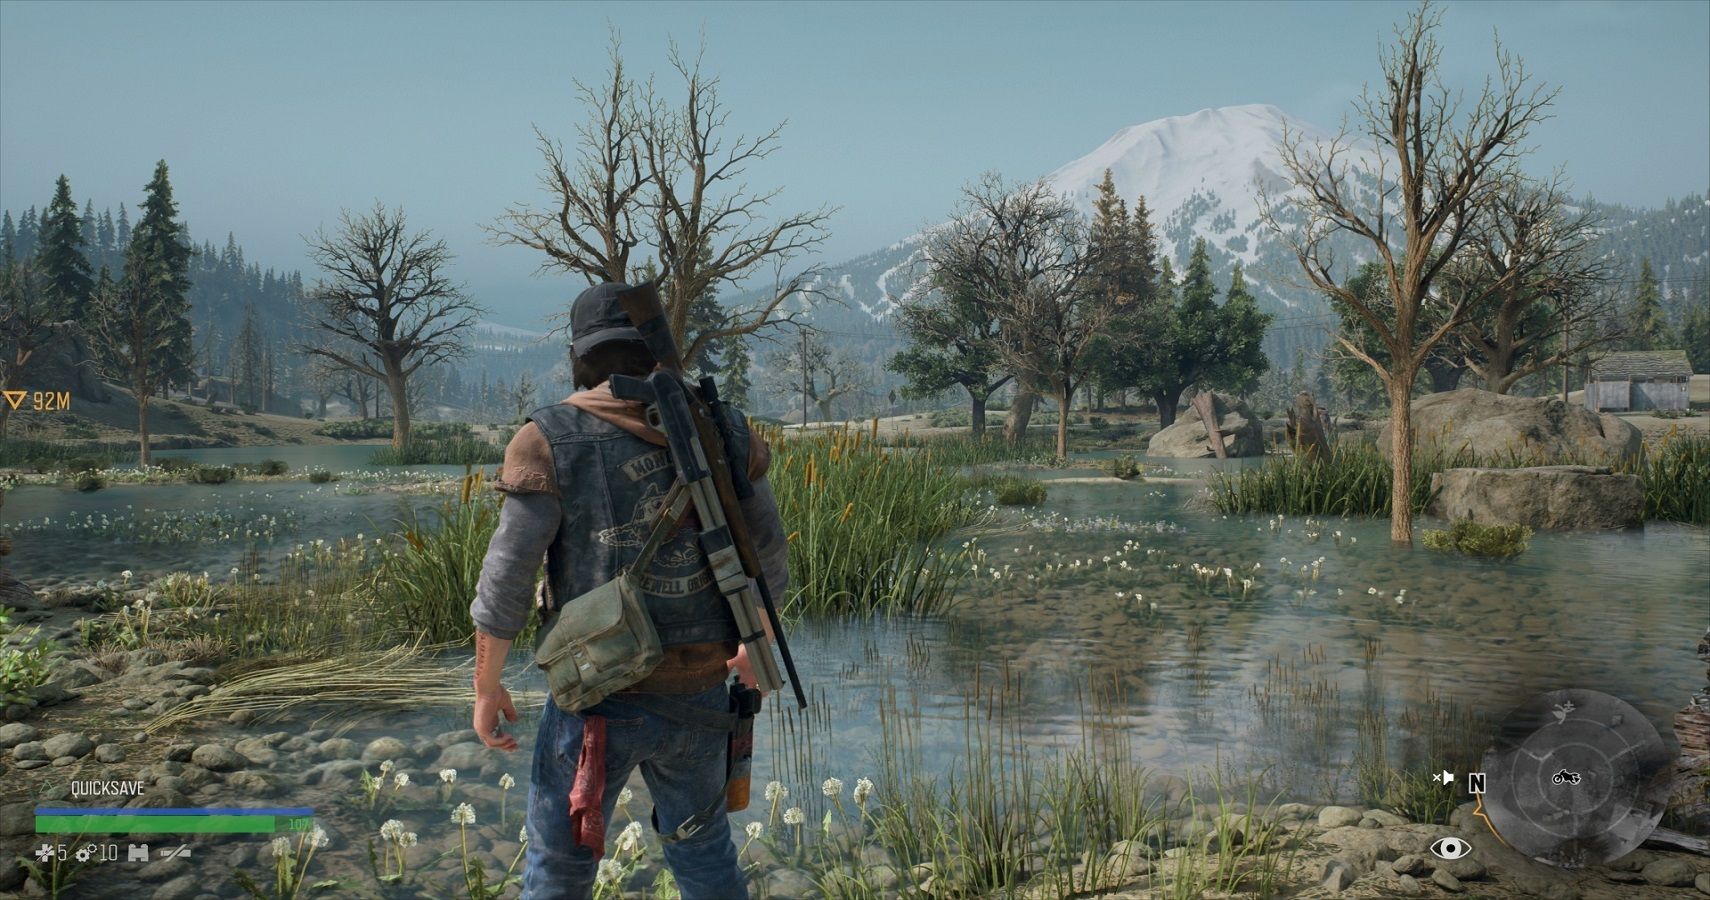 Days Gone review